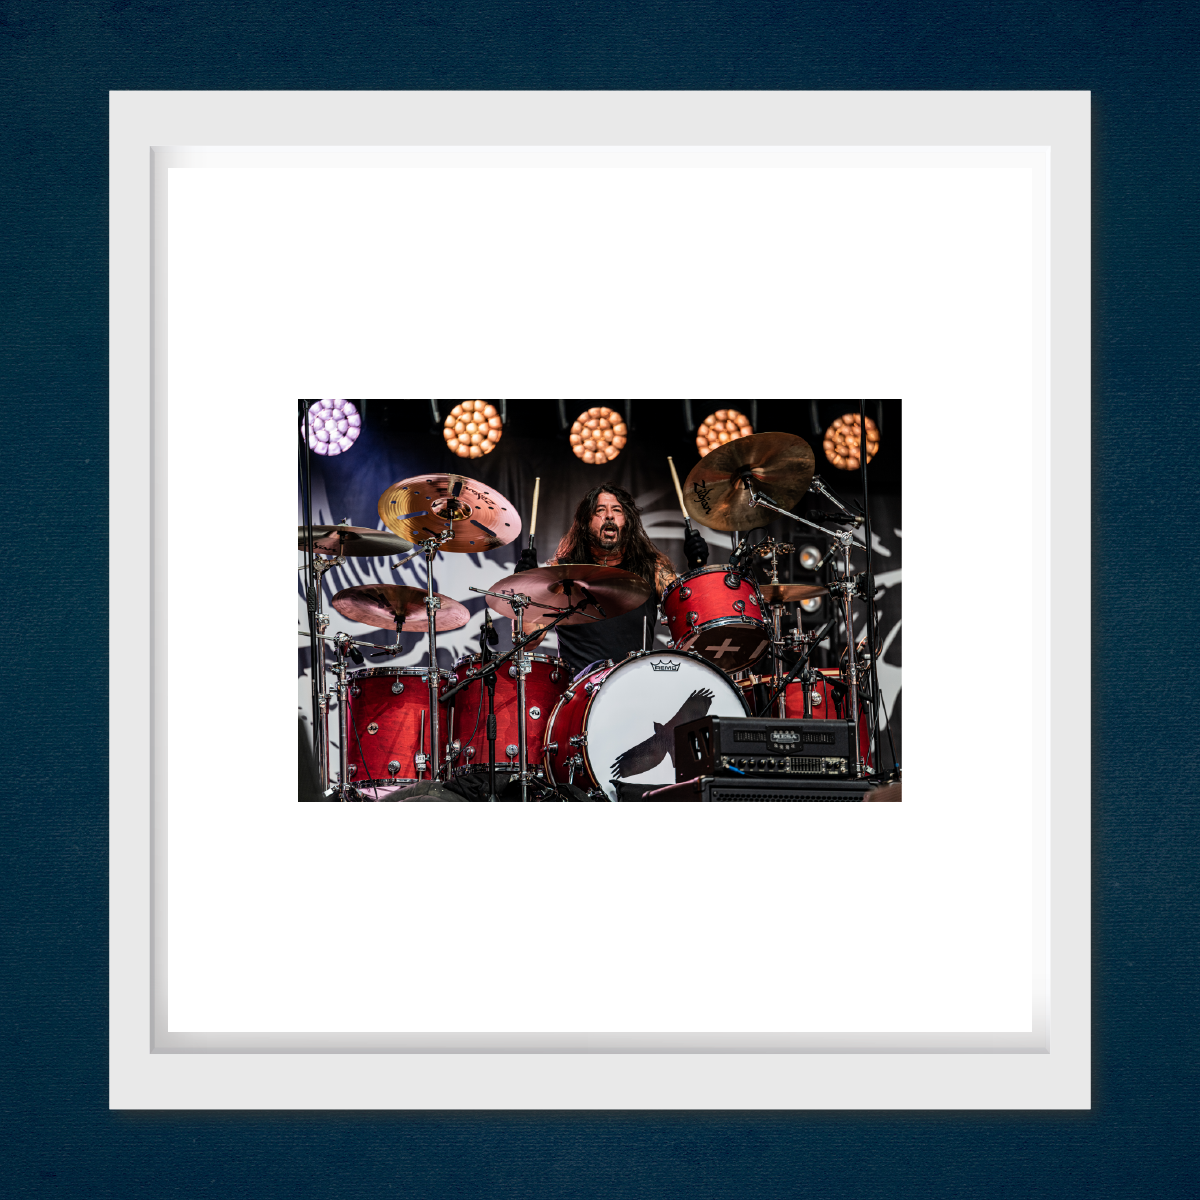 dave grohl - taylor's wings - wembley stadium, london, september 3, 2022 - 12 x 12 inch - limited edition print